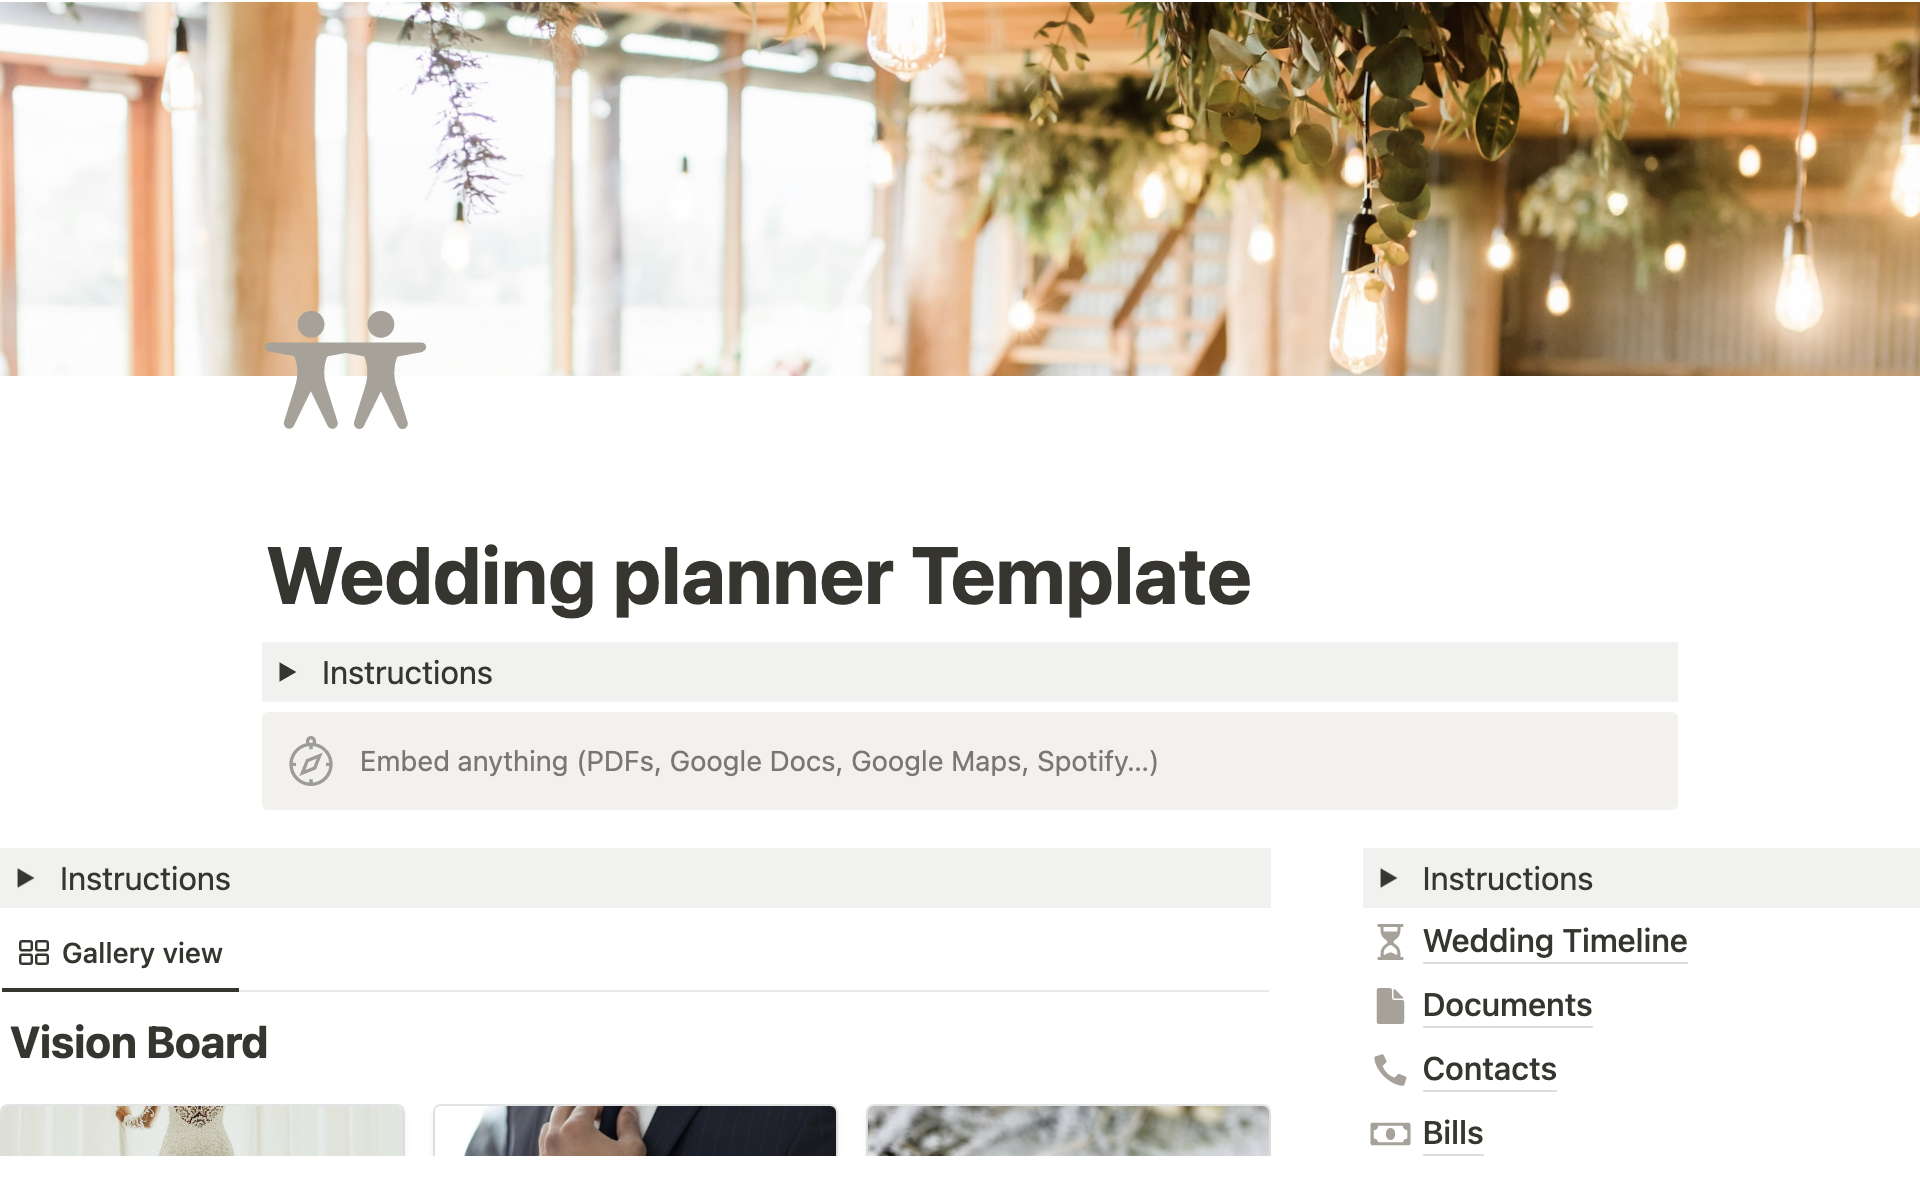 This template will help you organise your wedding!